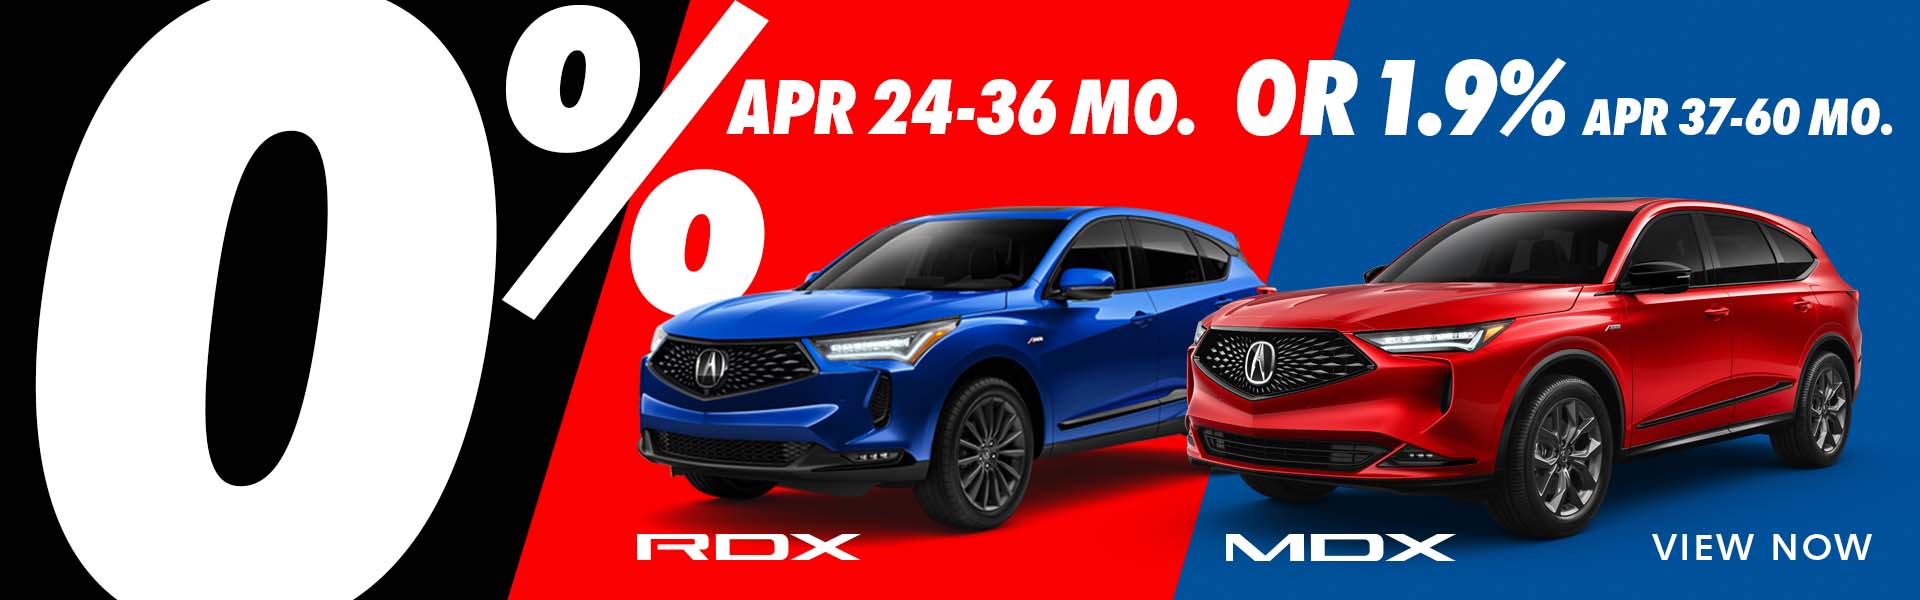 0% APR on RDX and MDX